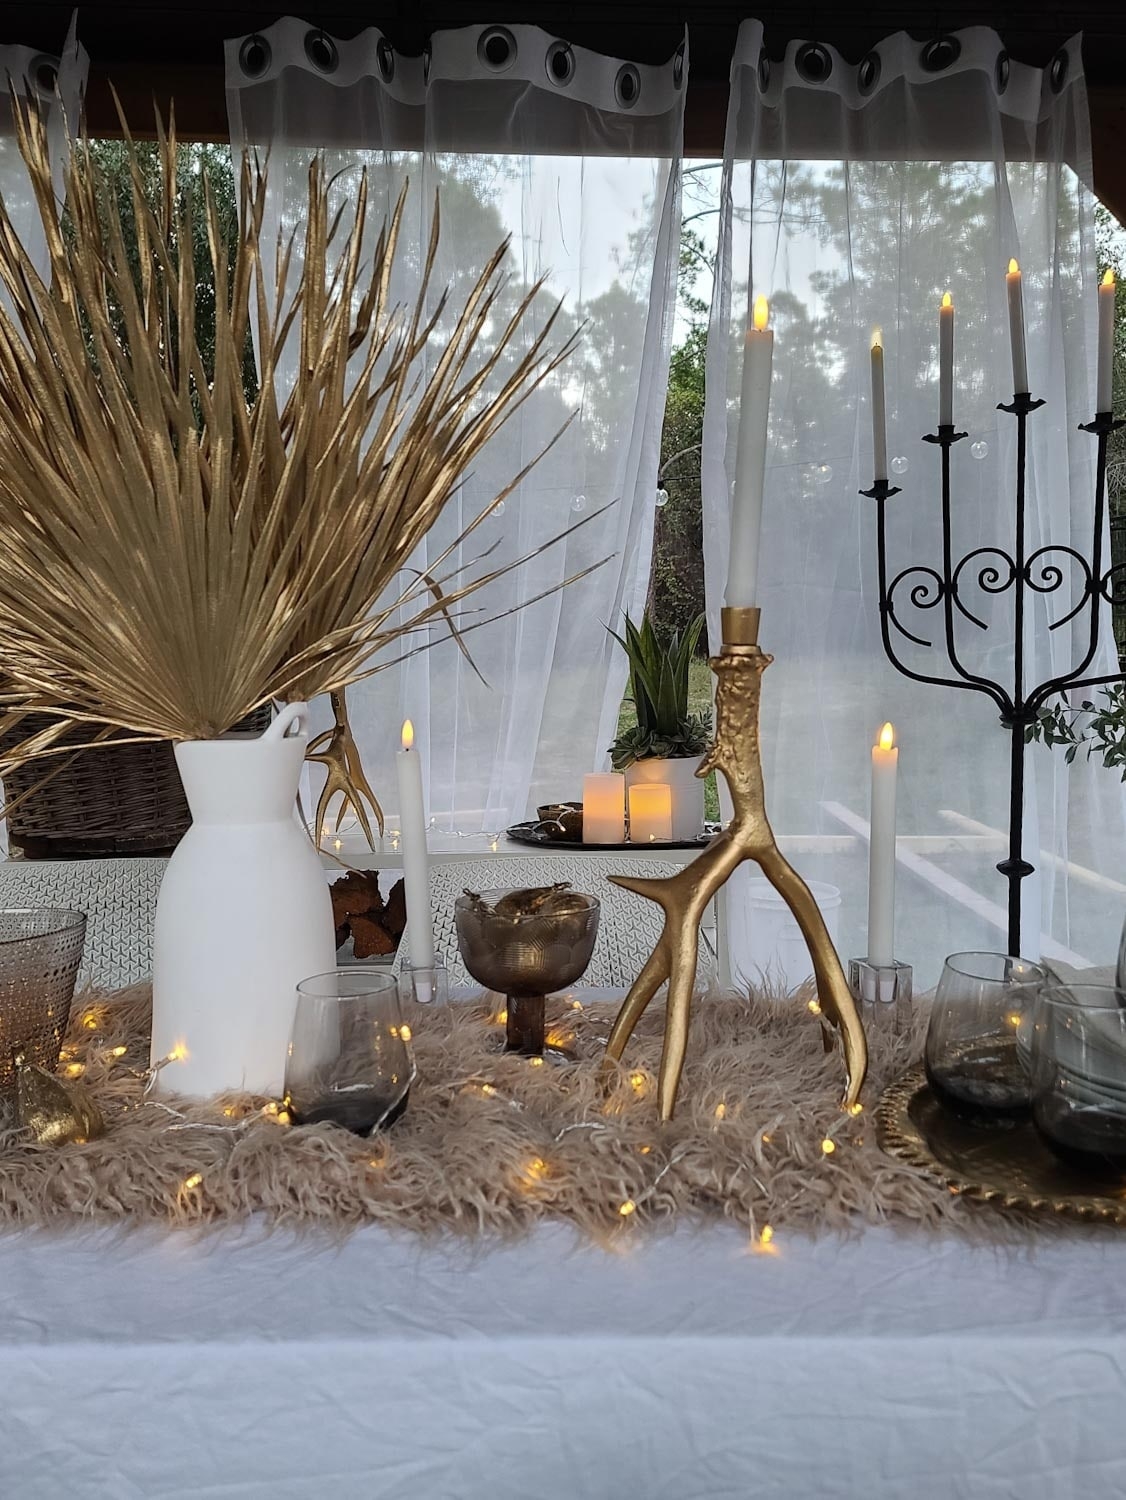 Country Living Winter Wonderland Dining space. Twinkle lights, candles, fur and antlers.